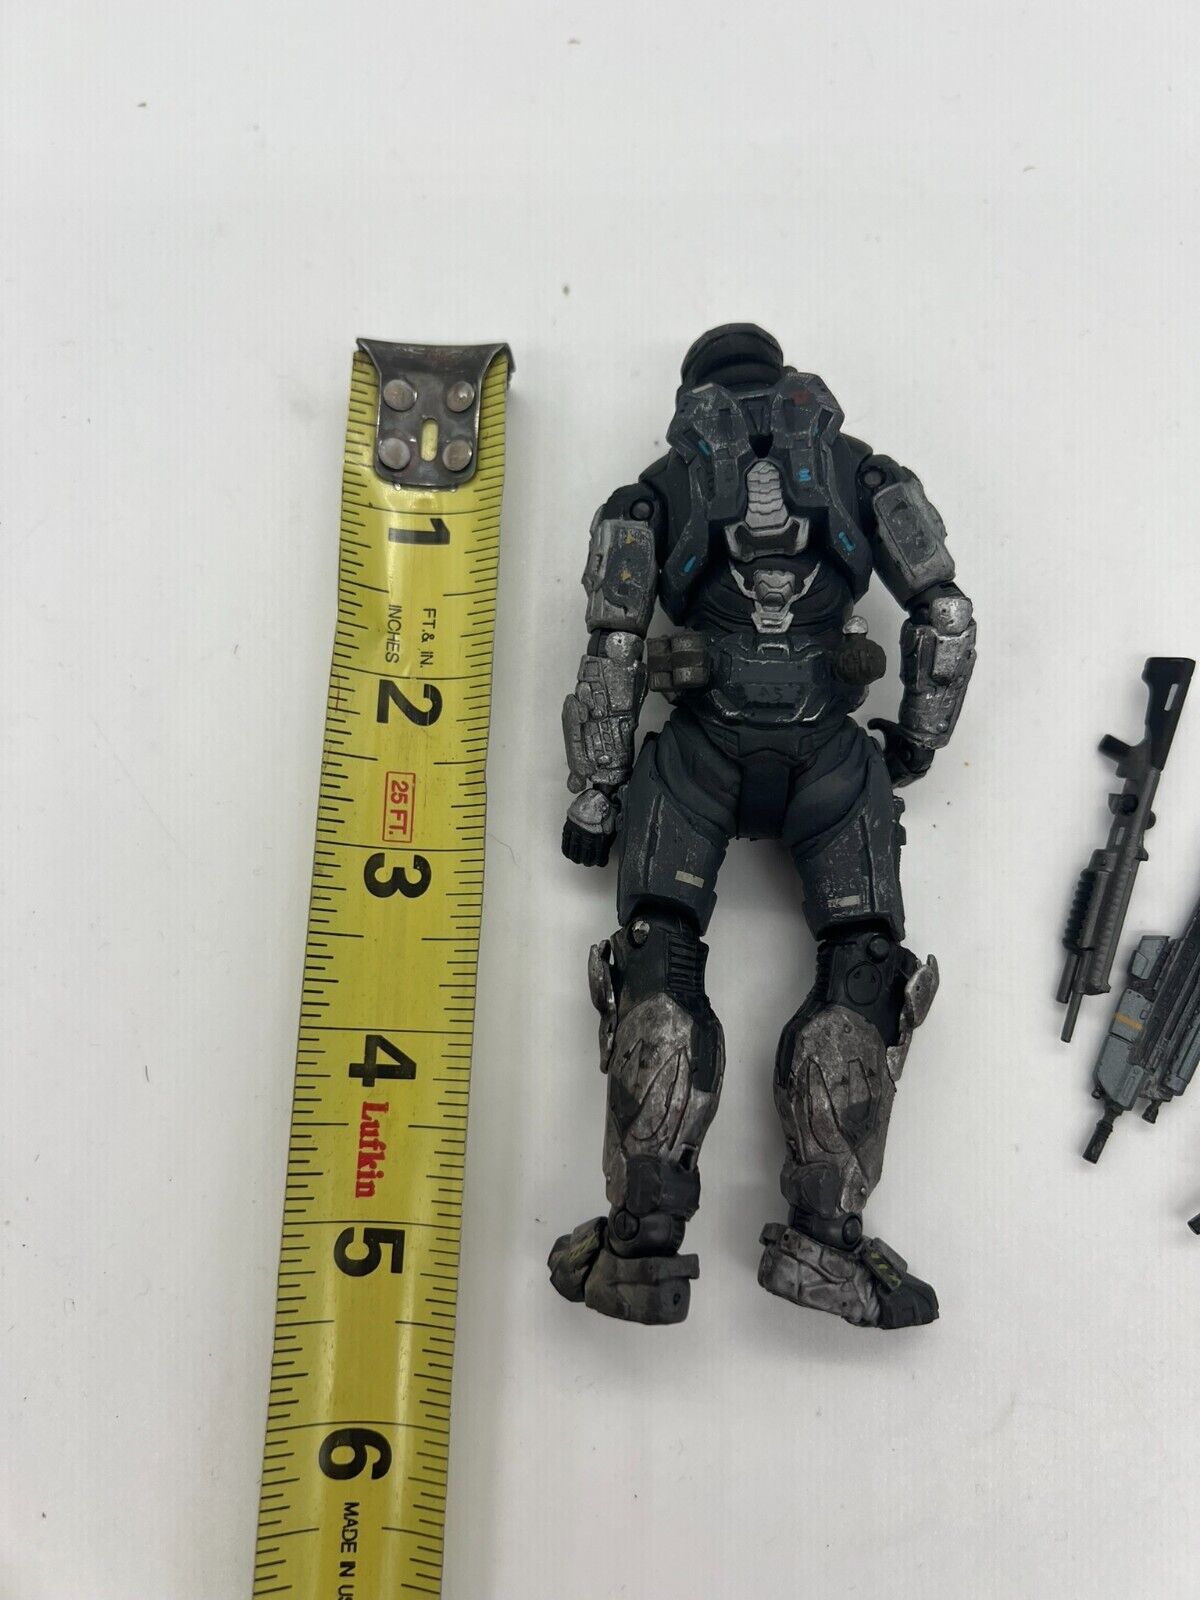 Halo Reach Series 1 NOBLE SIX 6 Action Figure McFarlane 2010 w/accessories